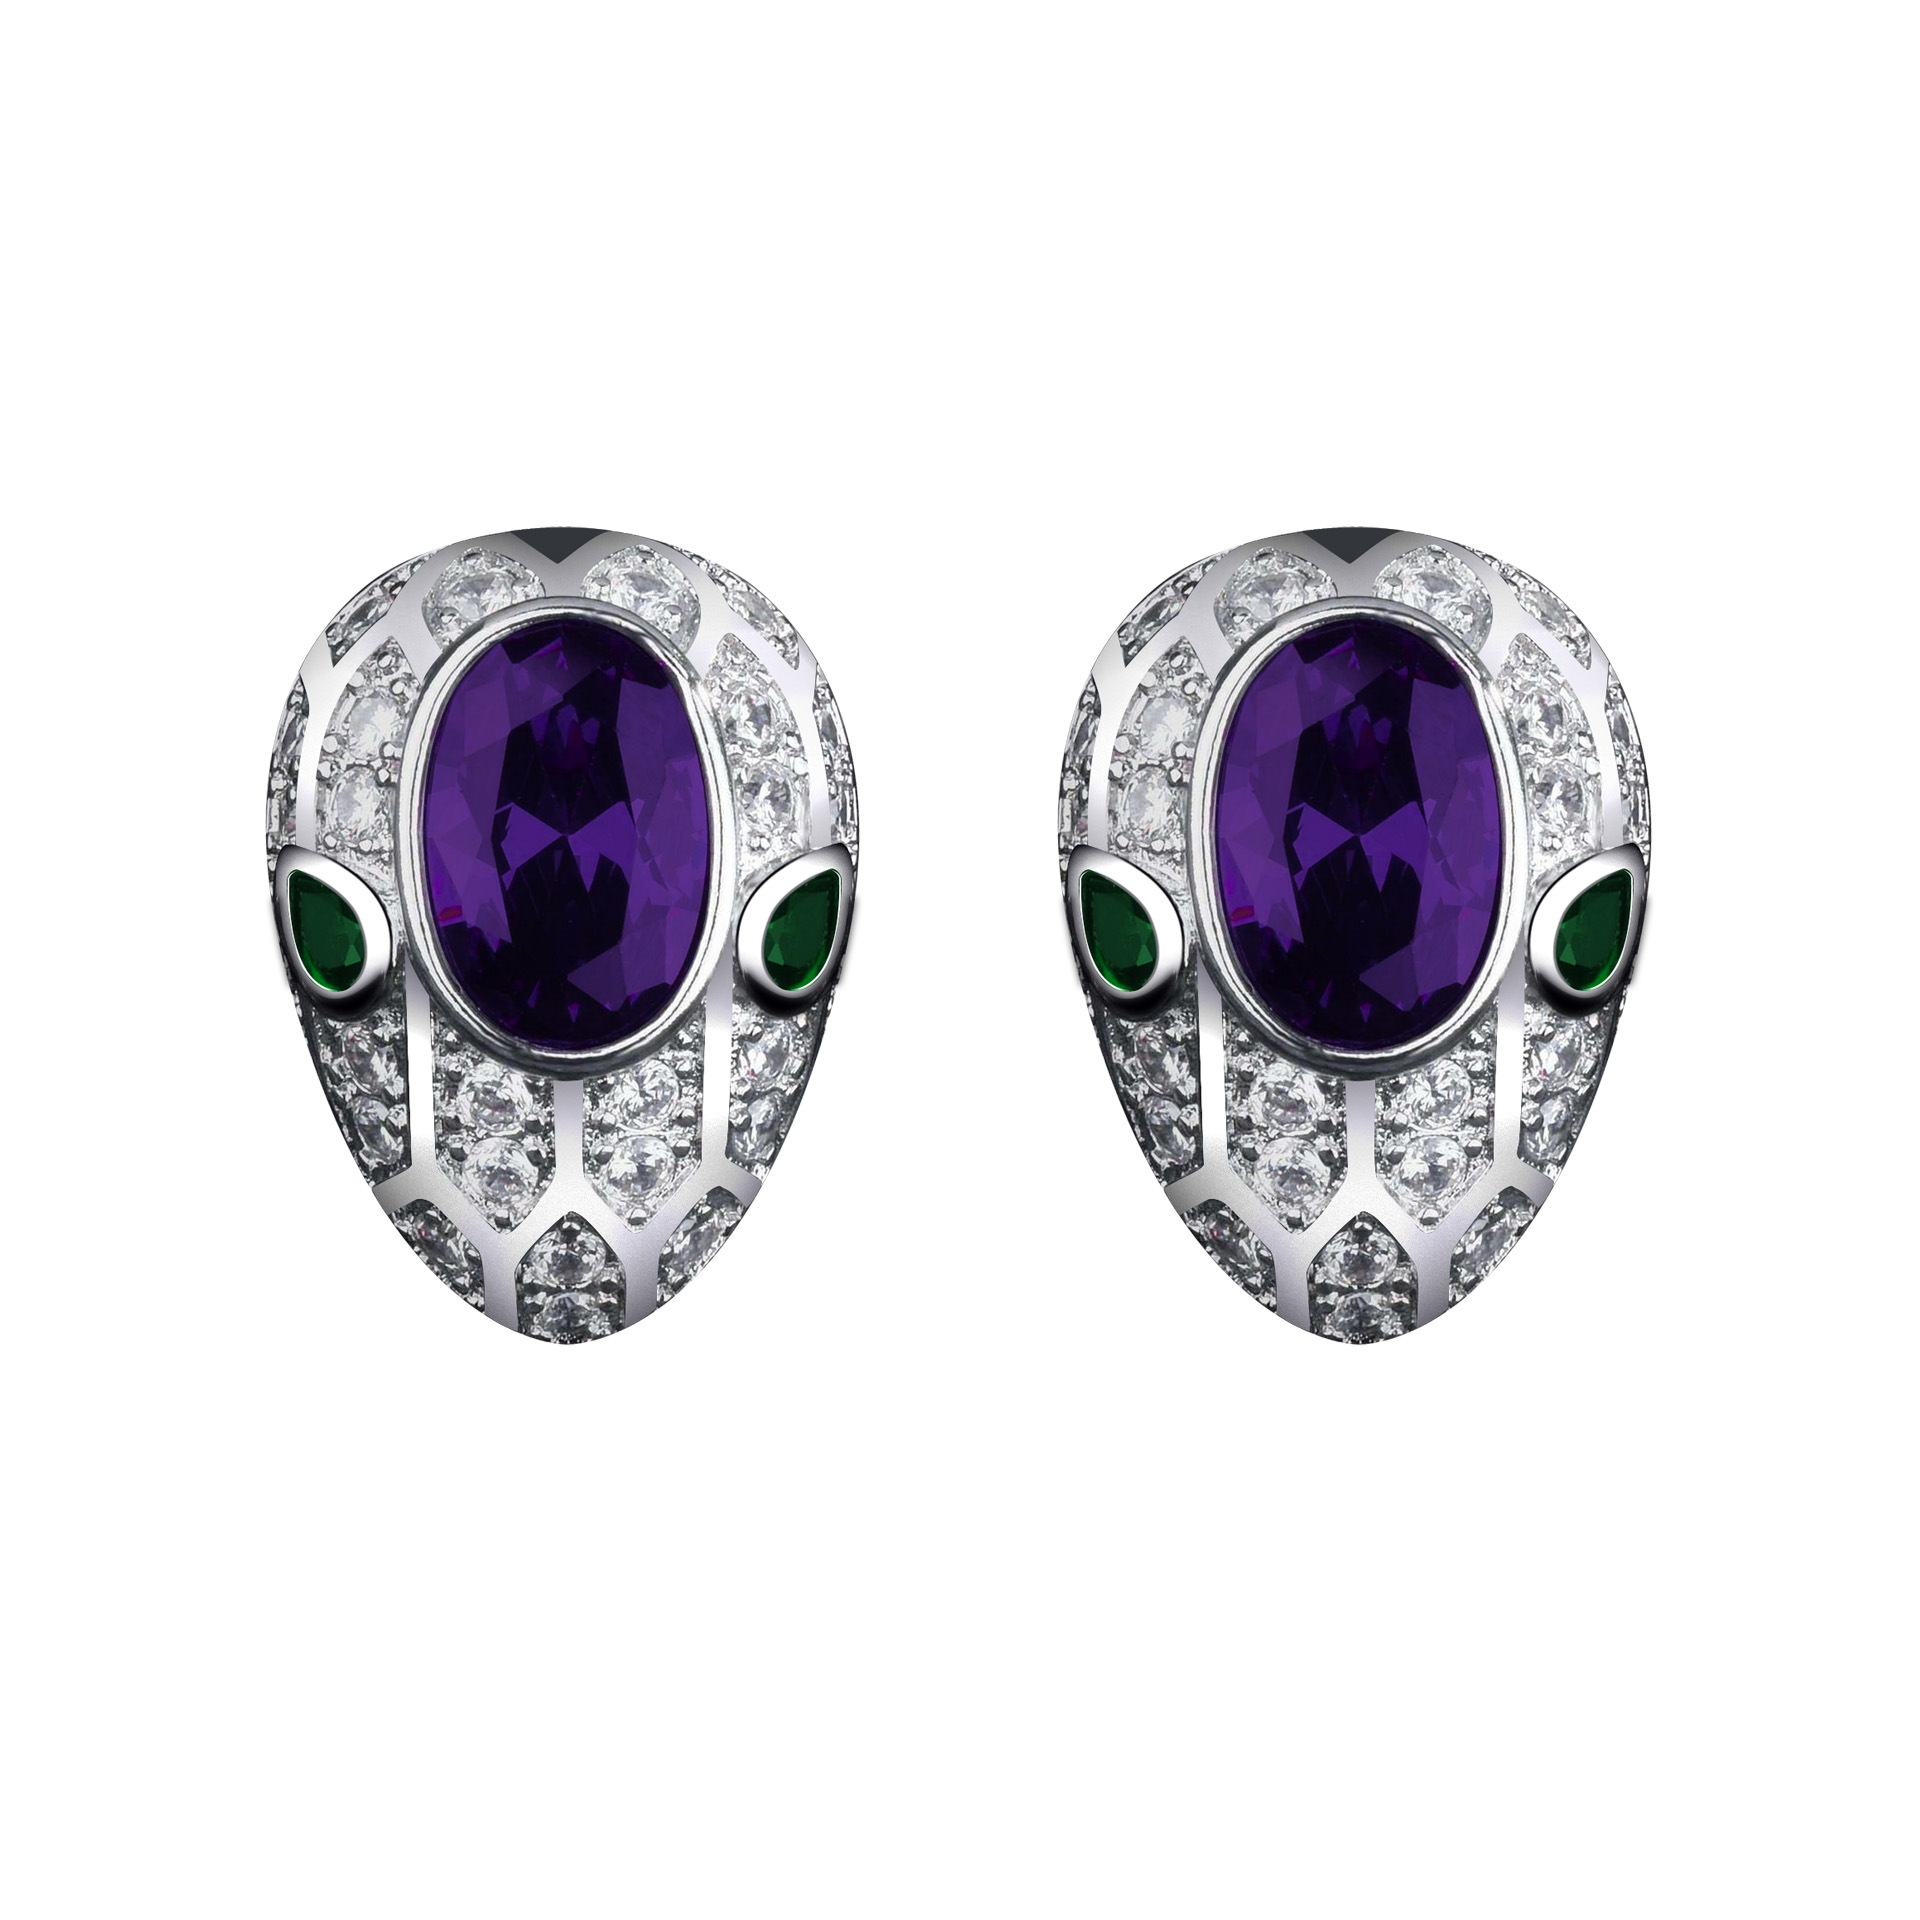 Gaoding Jewelry Amethyst Snake-Shaped Set Purple Diamond Snake Pendant Open Ring Colored Gems Stud Earrings Short Clavicle Chain